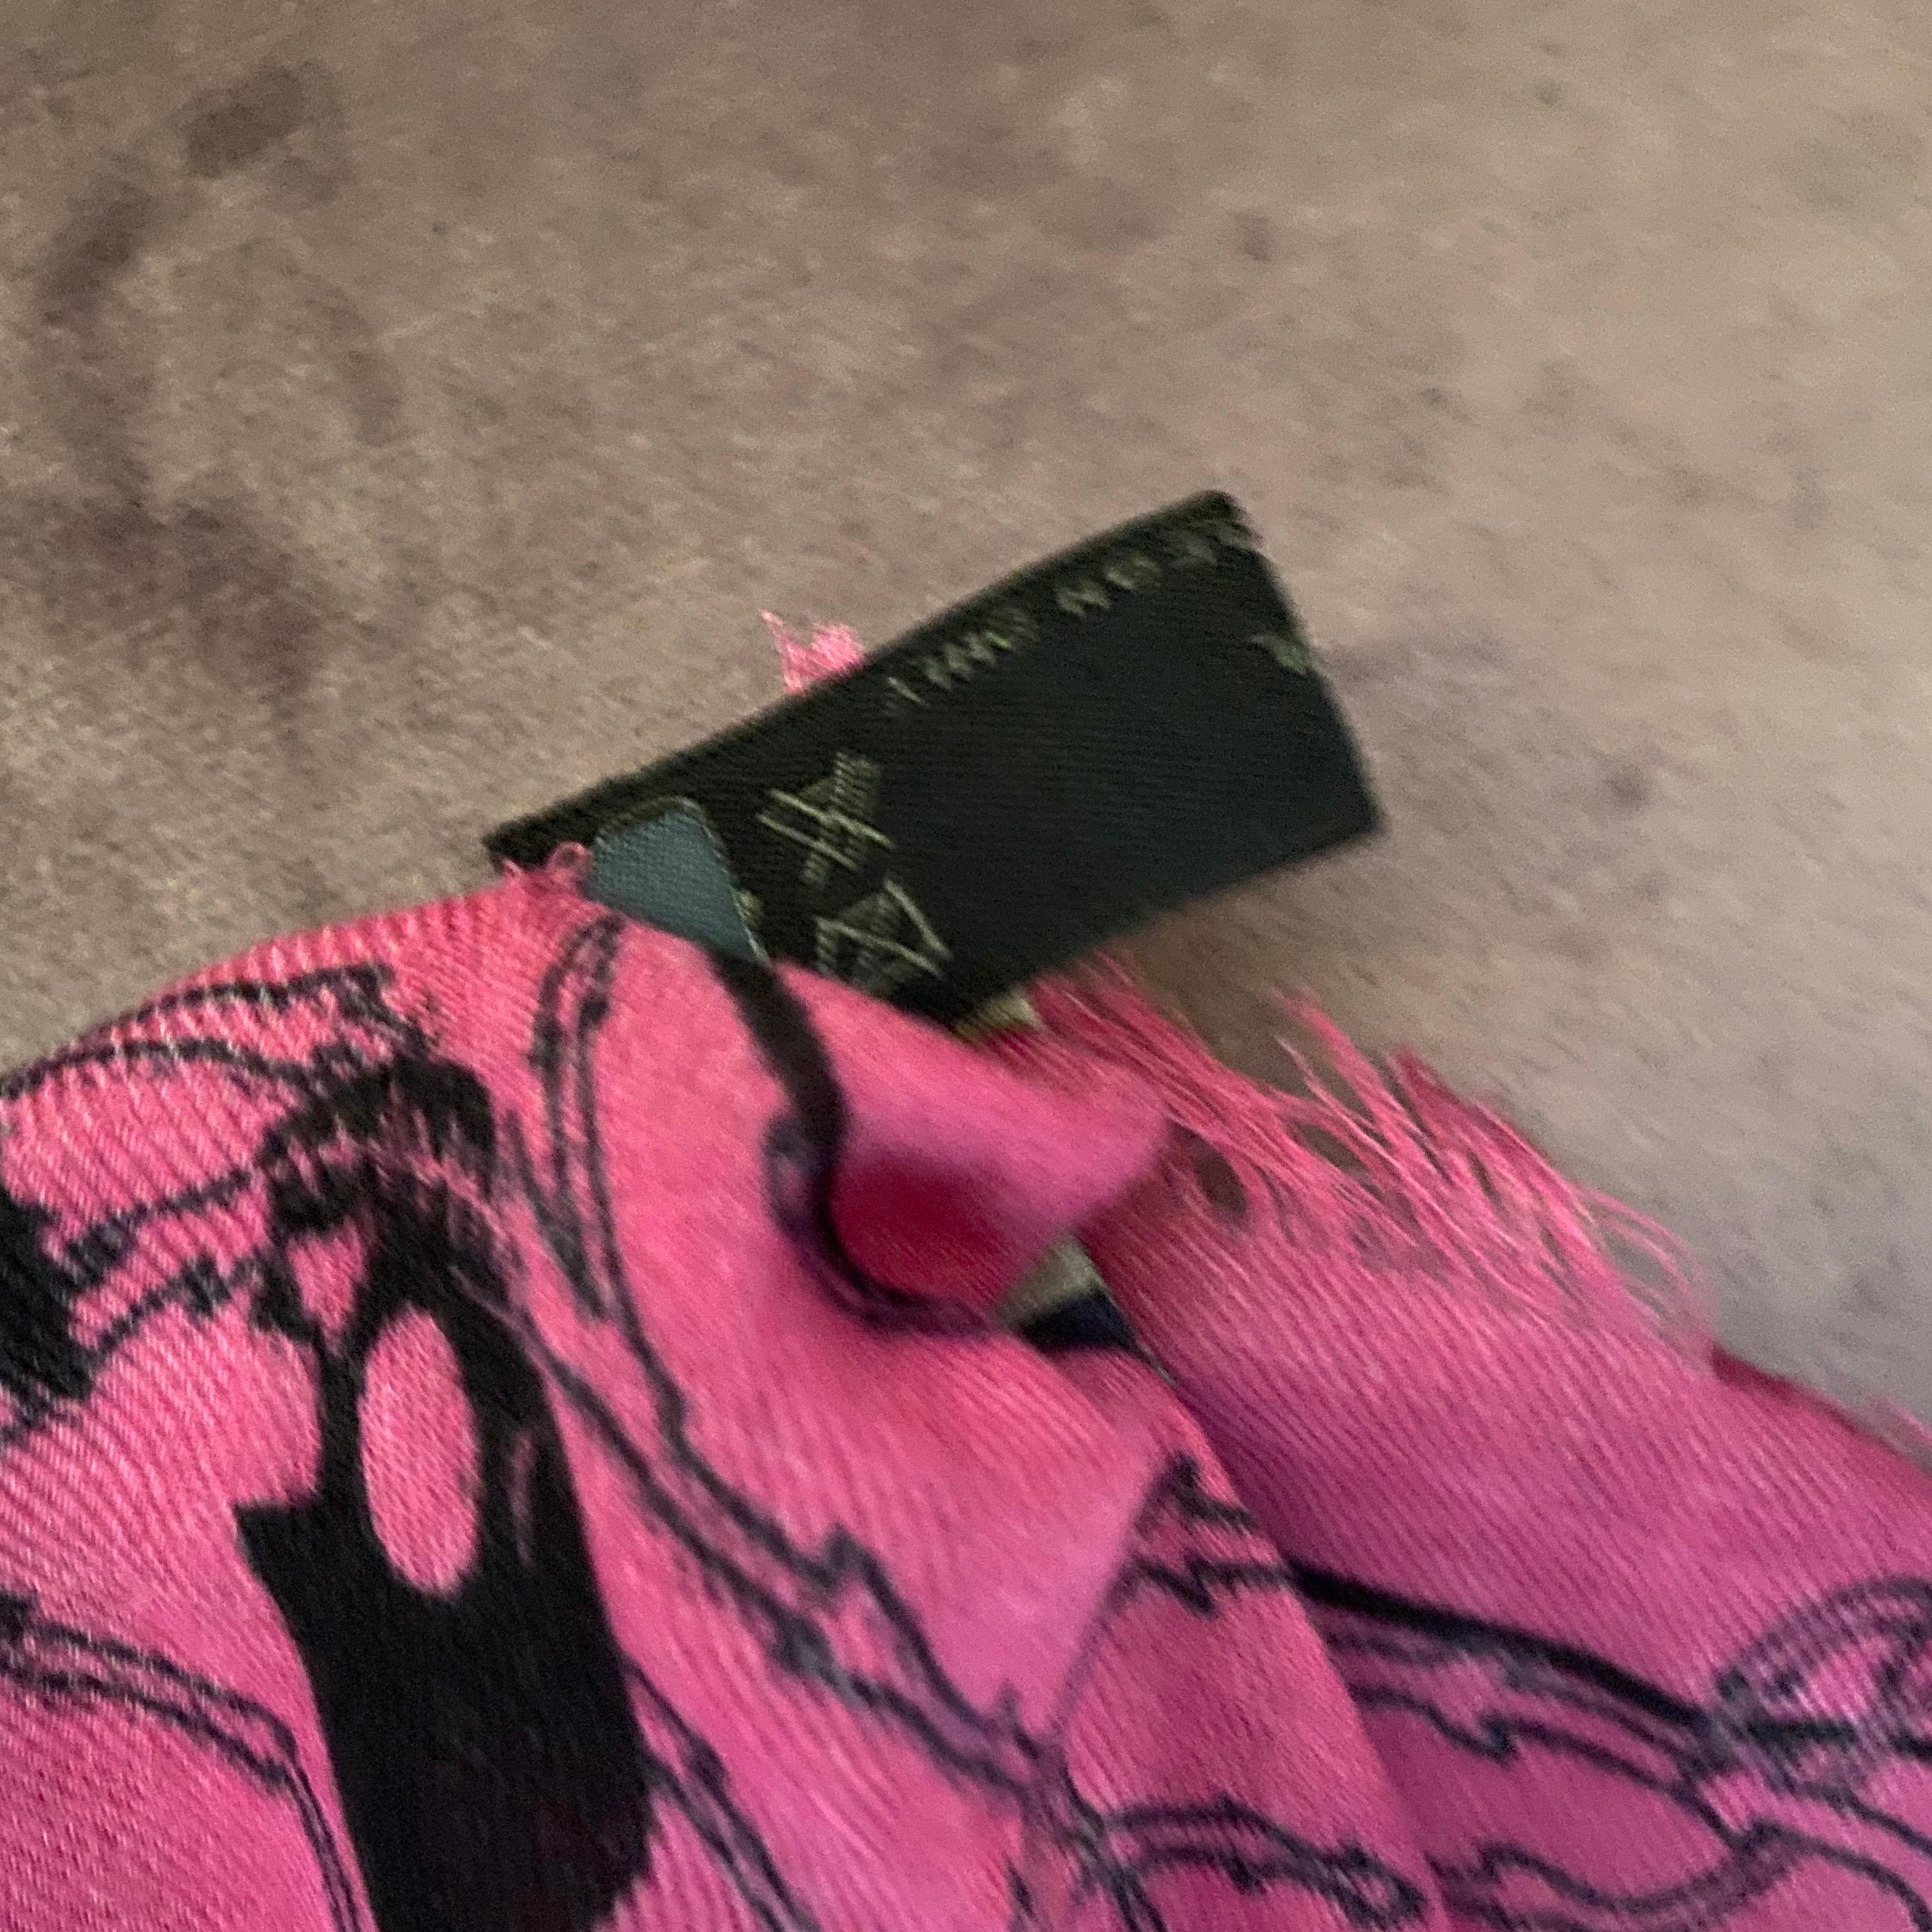 An Alexander McQueen Never Worn Italian Pink Shocking and Black Scarf 7